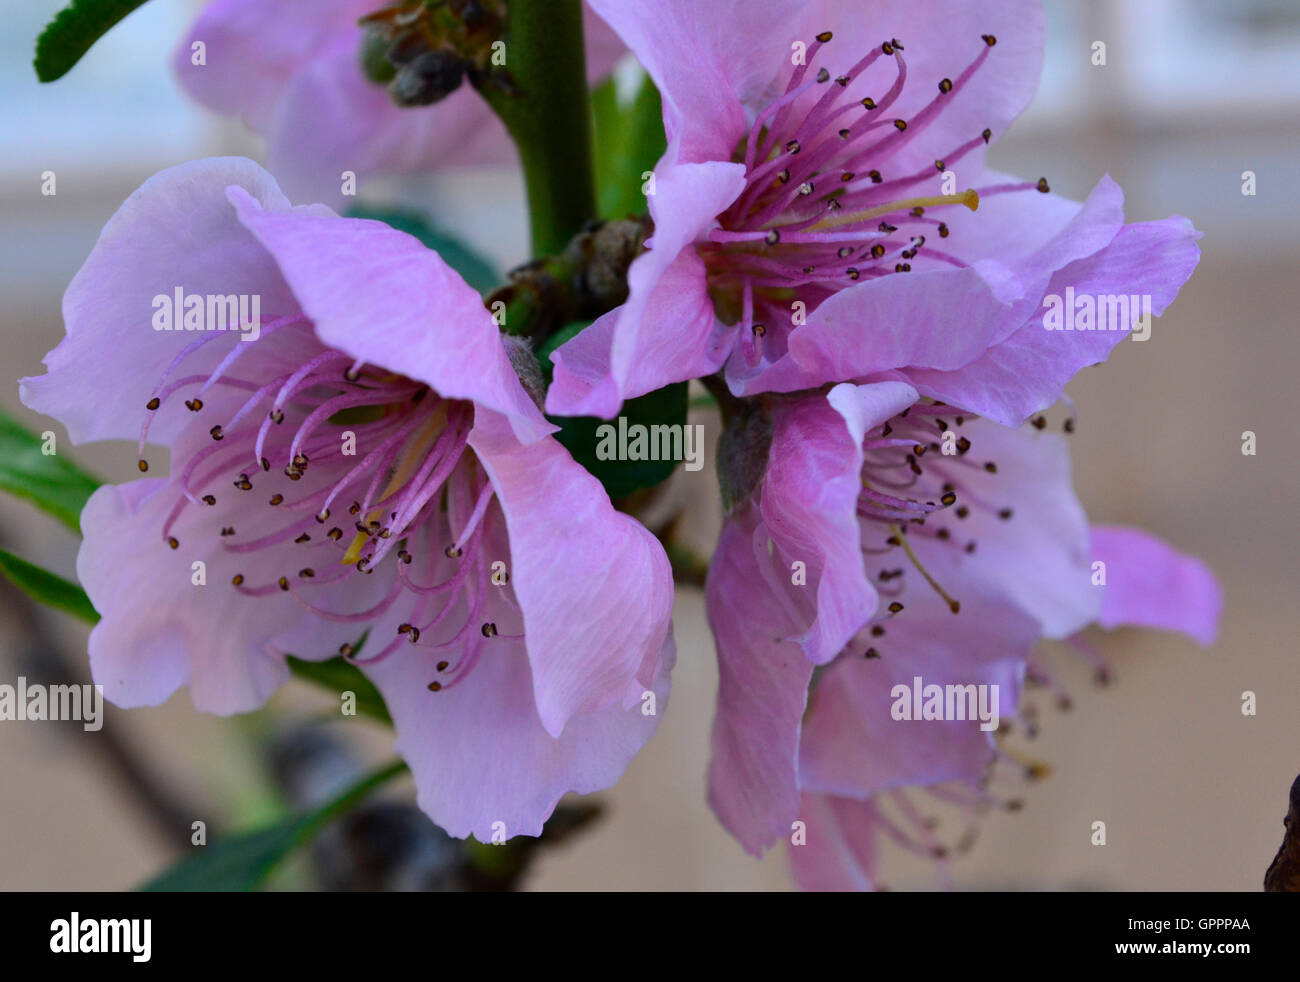 Lovely soft pink peach blossoms on a soft background with vivid pink pollen stems and in full bloom. Delicate pink flowers. Stock Photo